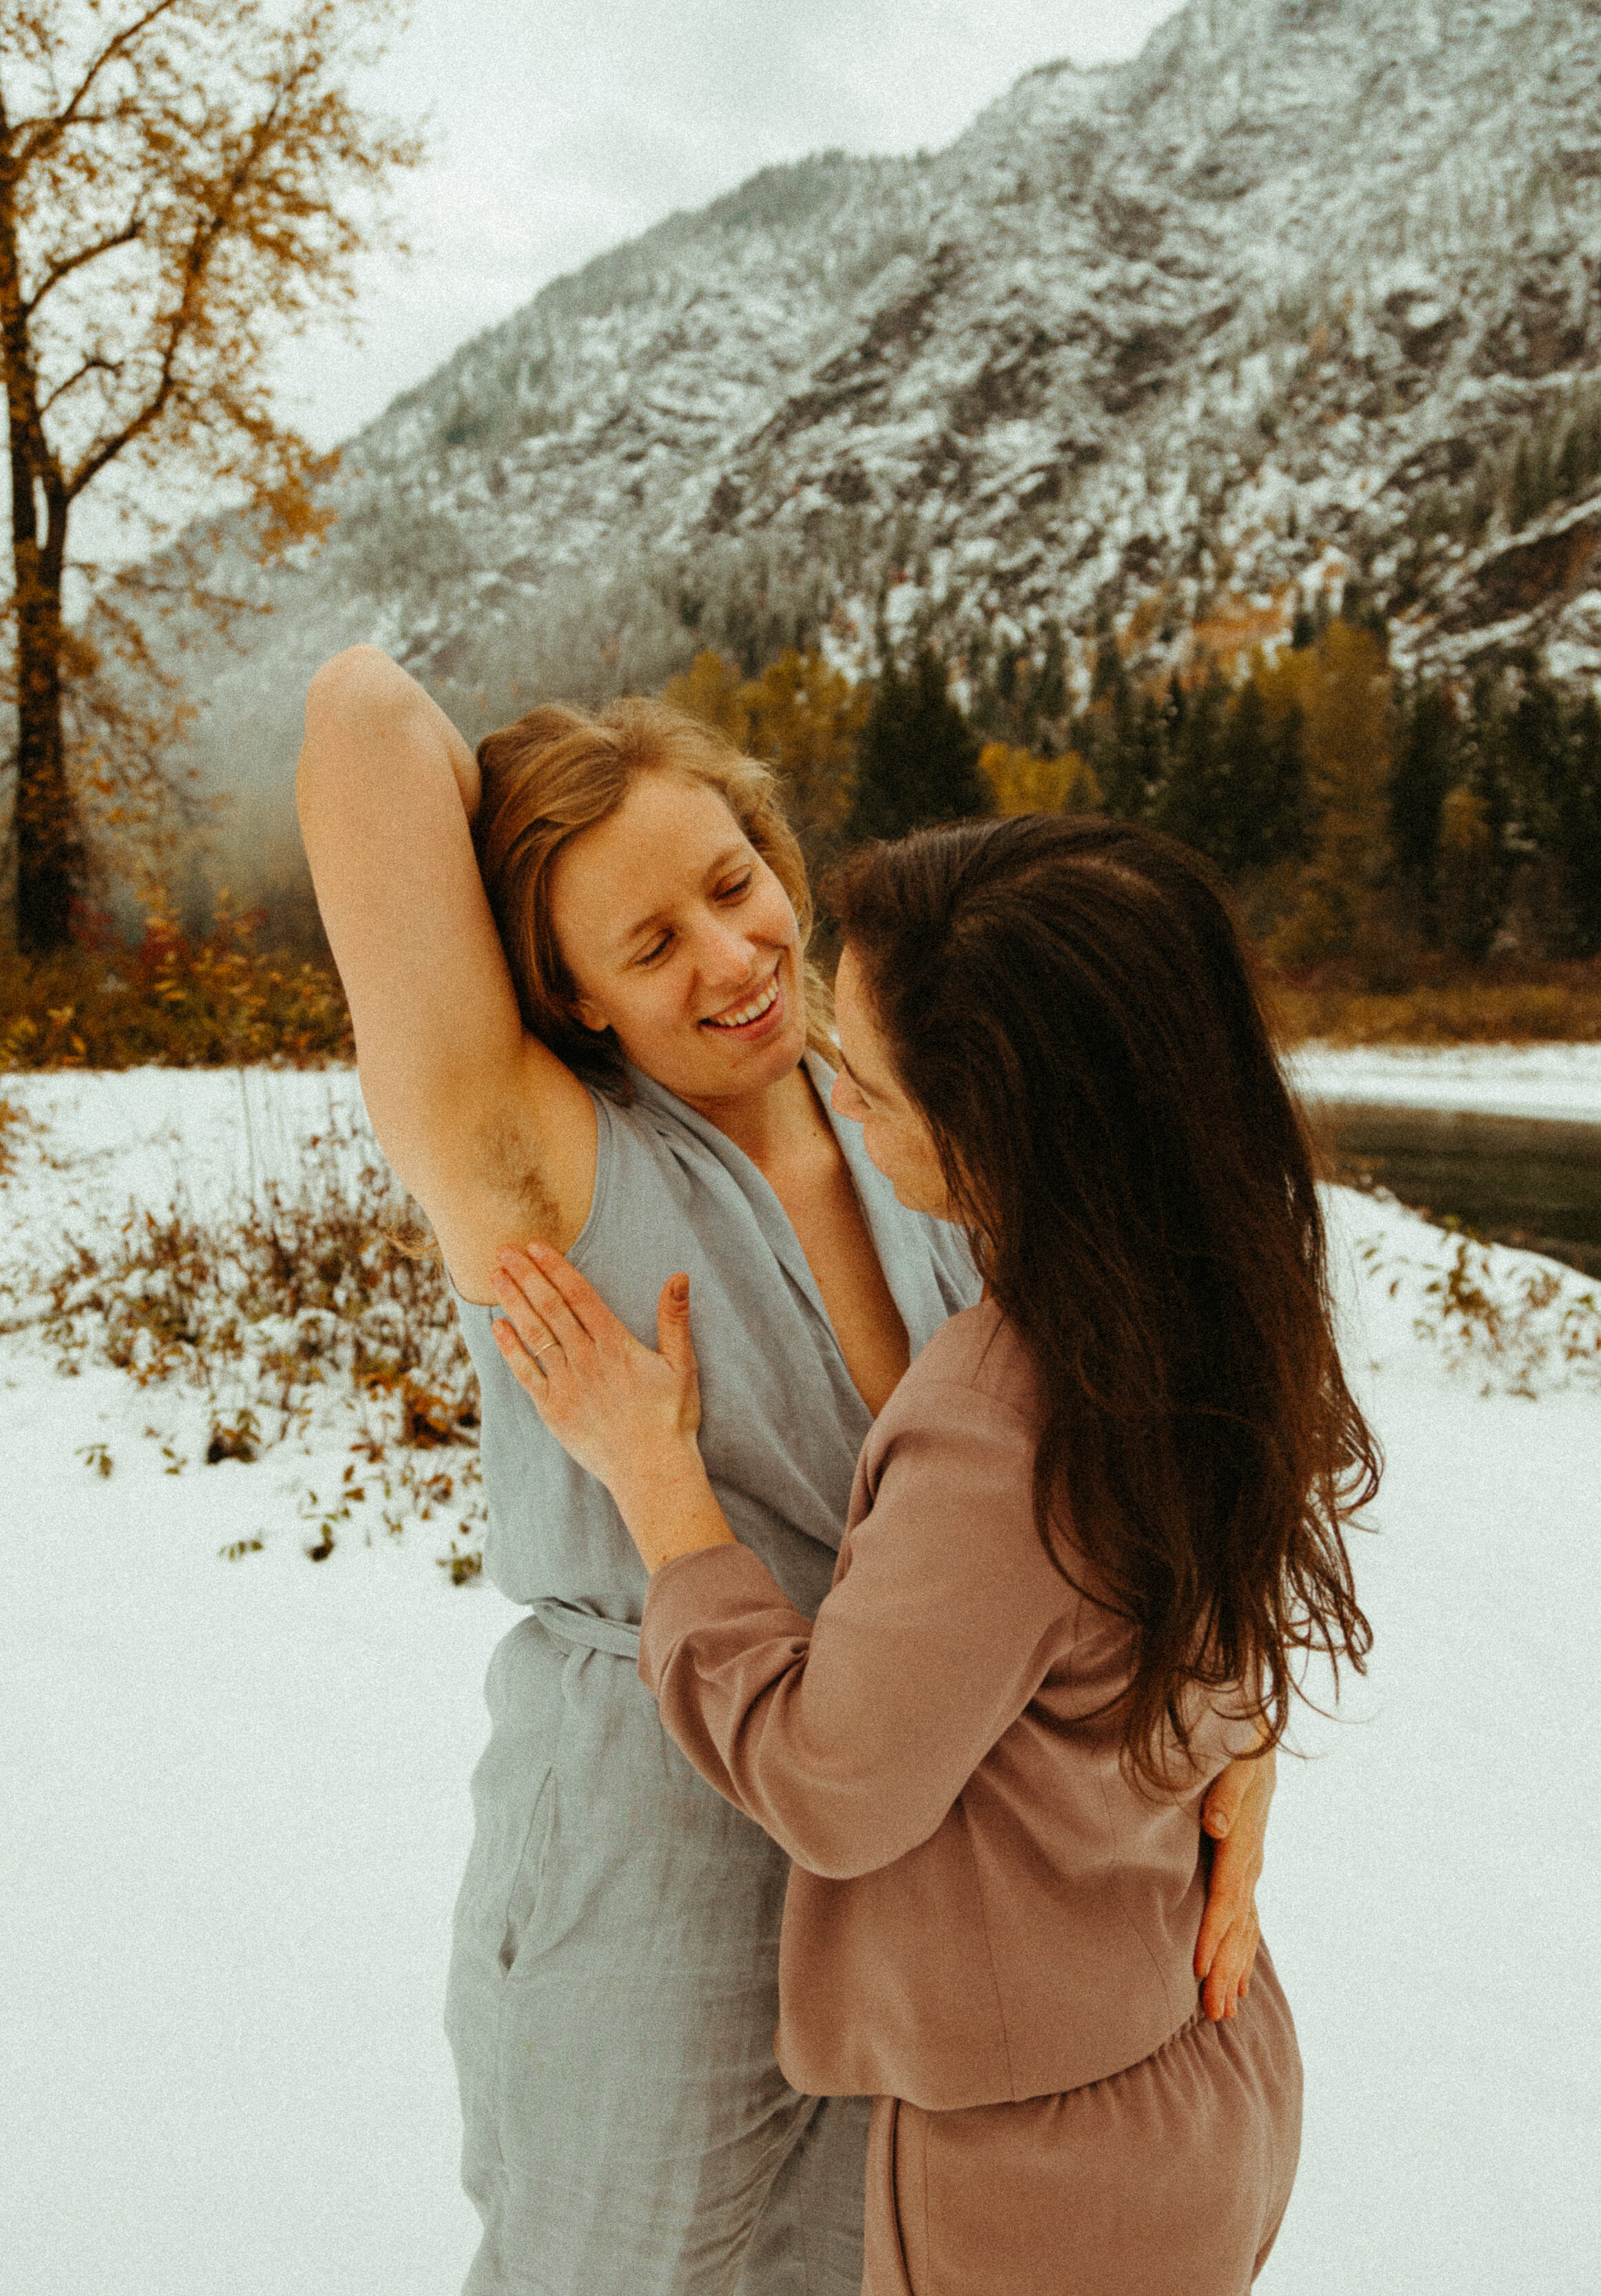 queer-gay-lesbian-trans-affirming-lgbtq-adventure-elopement-intimate-wedding-photographer-pnw-pacific-northwest-pnw-mountain-stream-forest-cowgay-tacoma-seattle-washington-portland-oregon-halle-roland-photography-non-binary-analog-film-artist-165-227.jpg